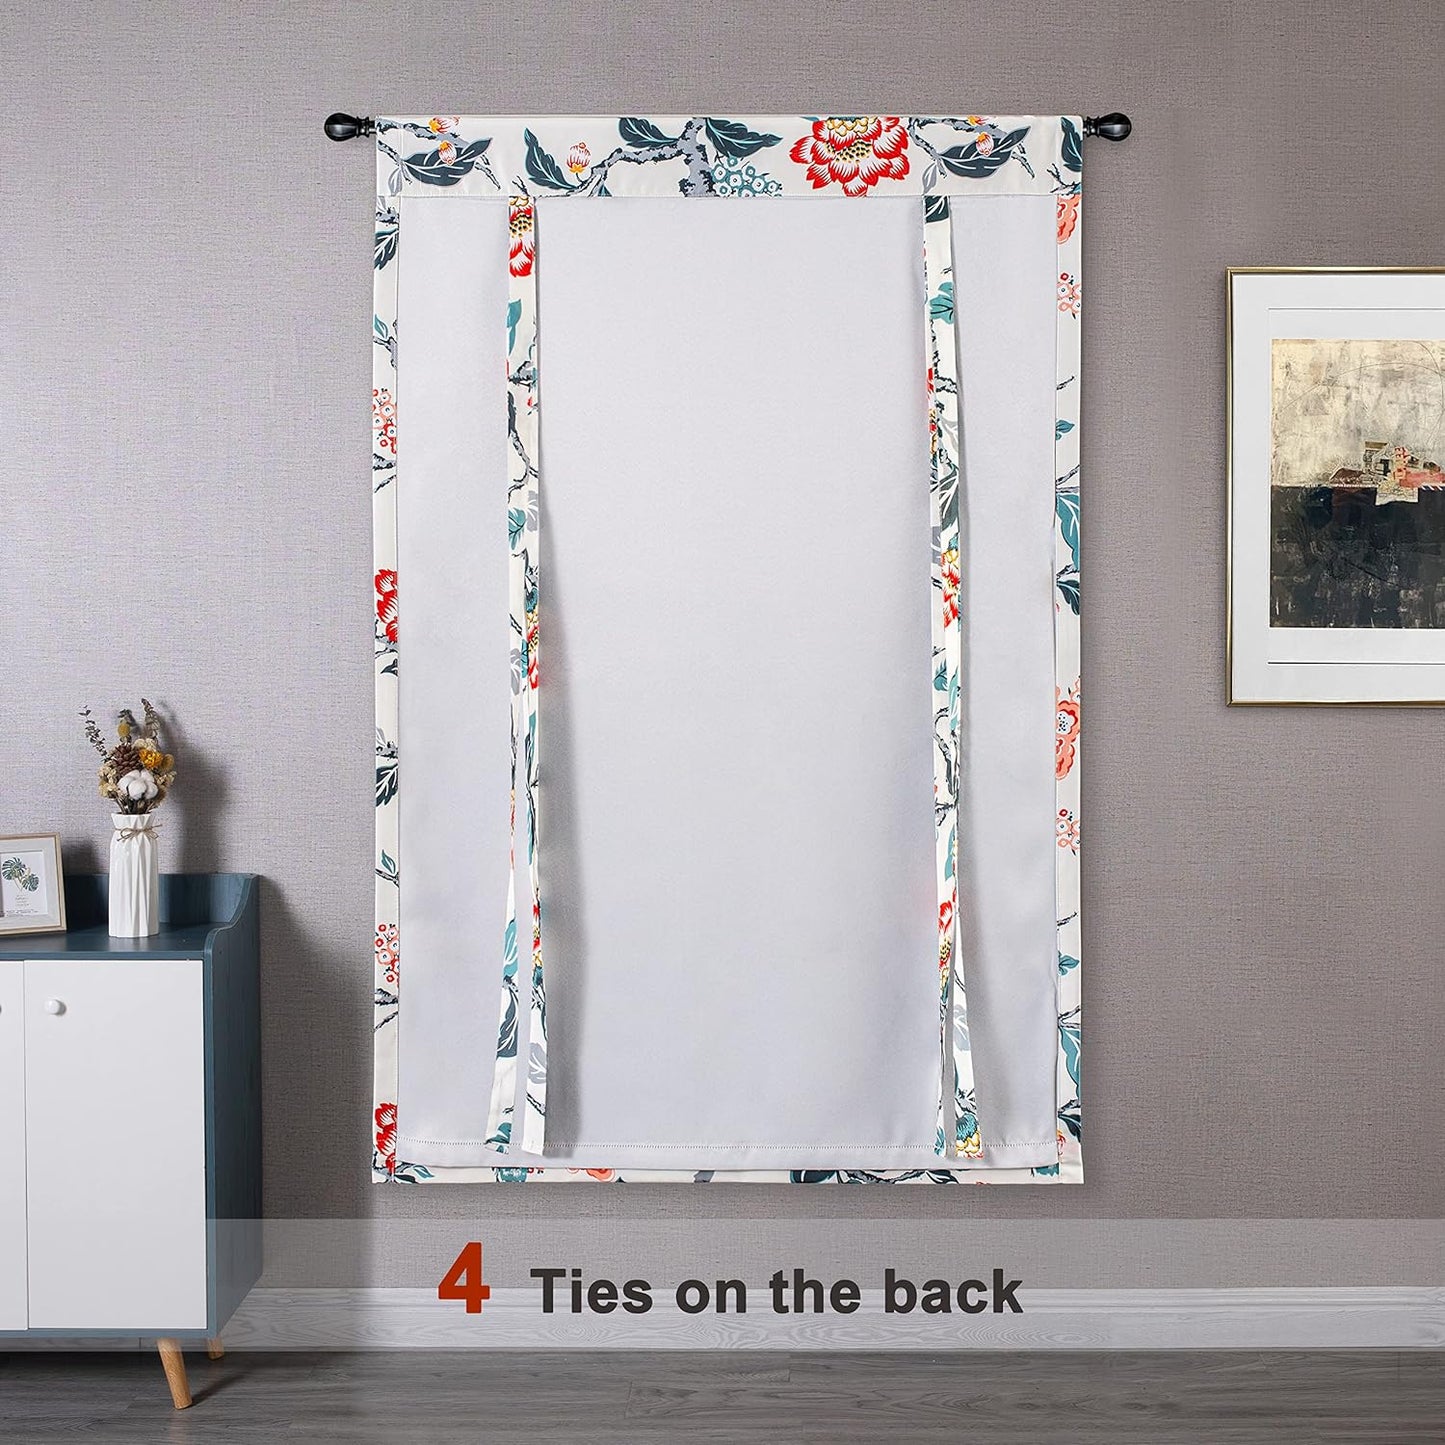 Driftaway Ada Botanical Print Lined Flower Leaf Tie up Curtain Thermal Insulated Privacy Blackout Window Adjustable Balloon Curtain Shade Rod Pocket Single 39 Inch by 55 Inch Ivory Orange Teal  DriftAway   